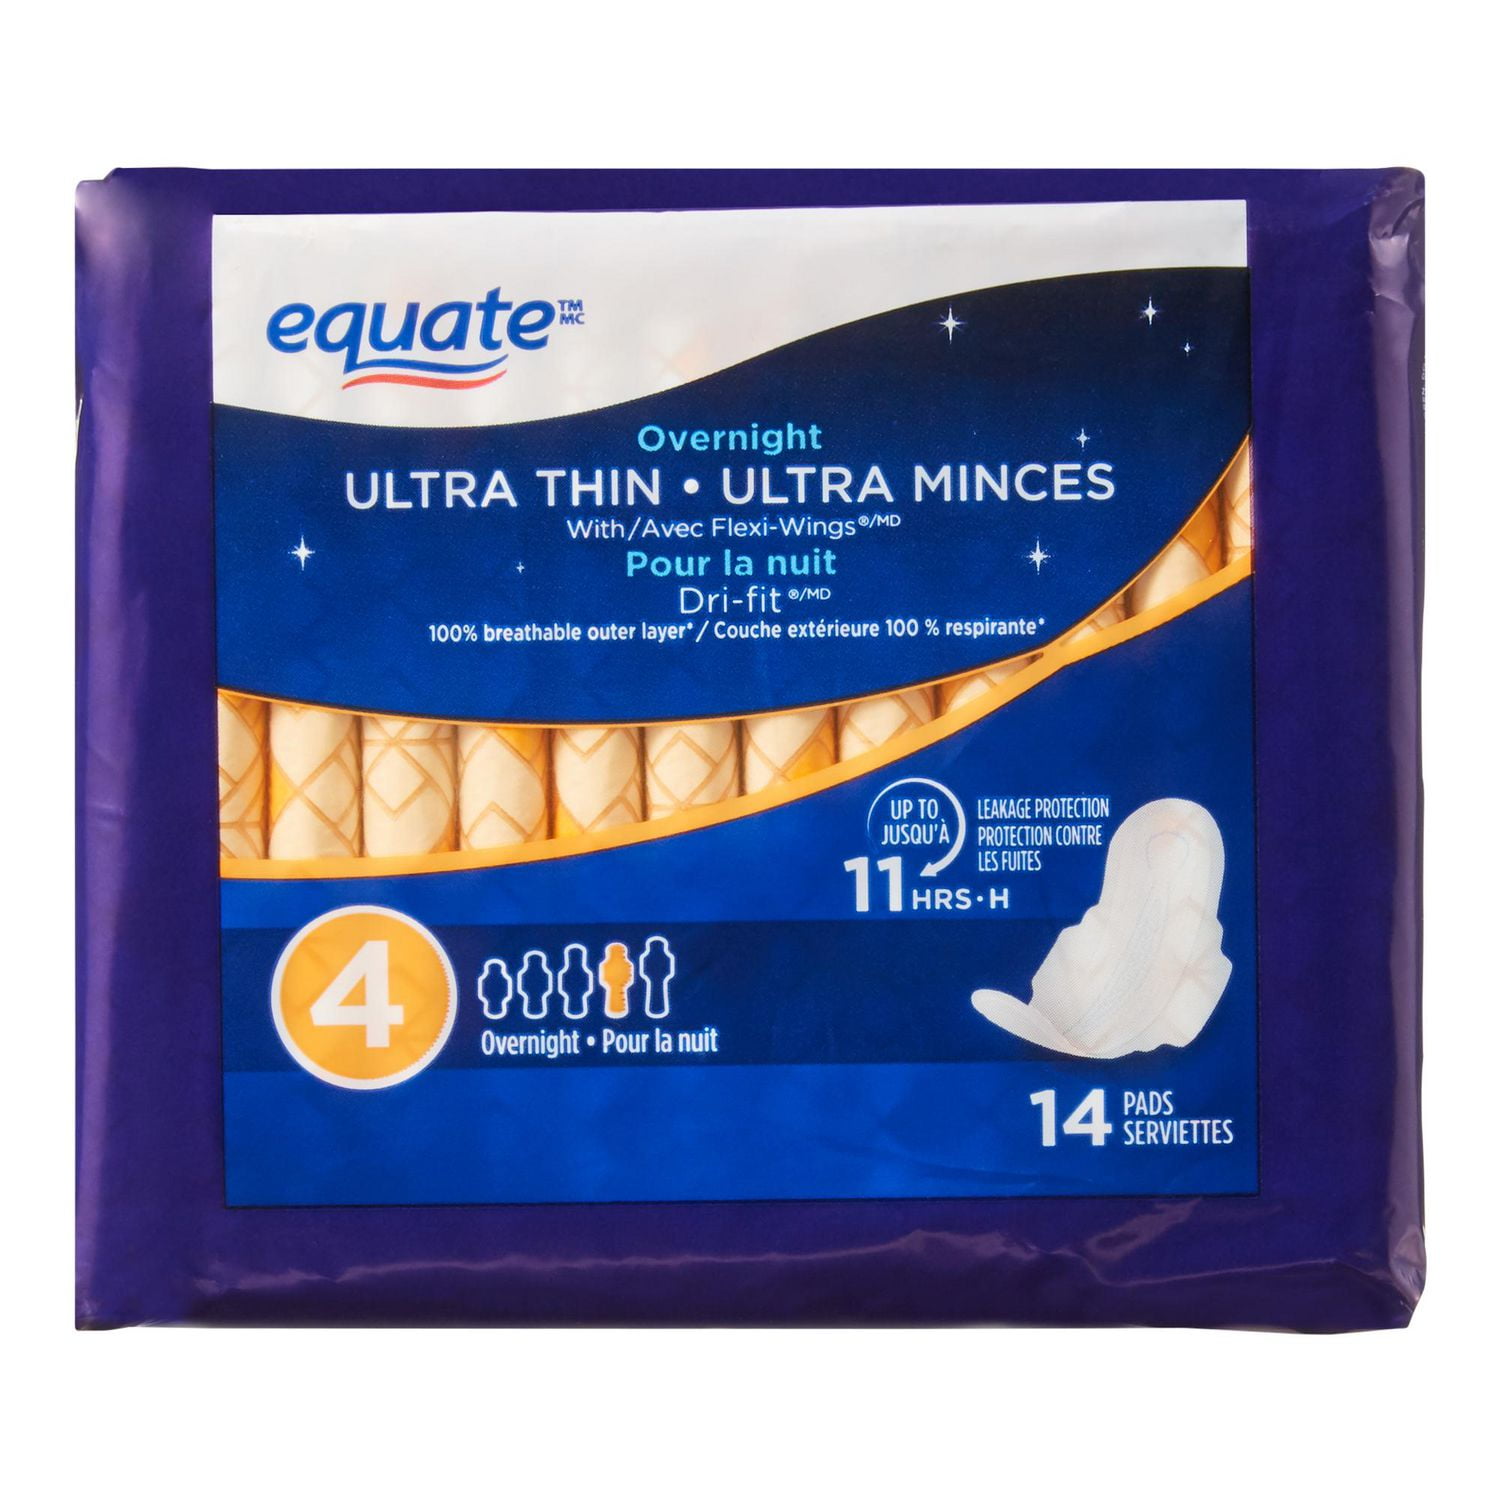 Equate Overnight Absorbency Ultra Thin Pads, 14 Pads, Long